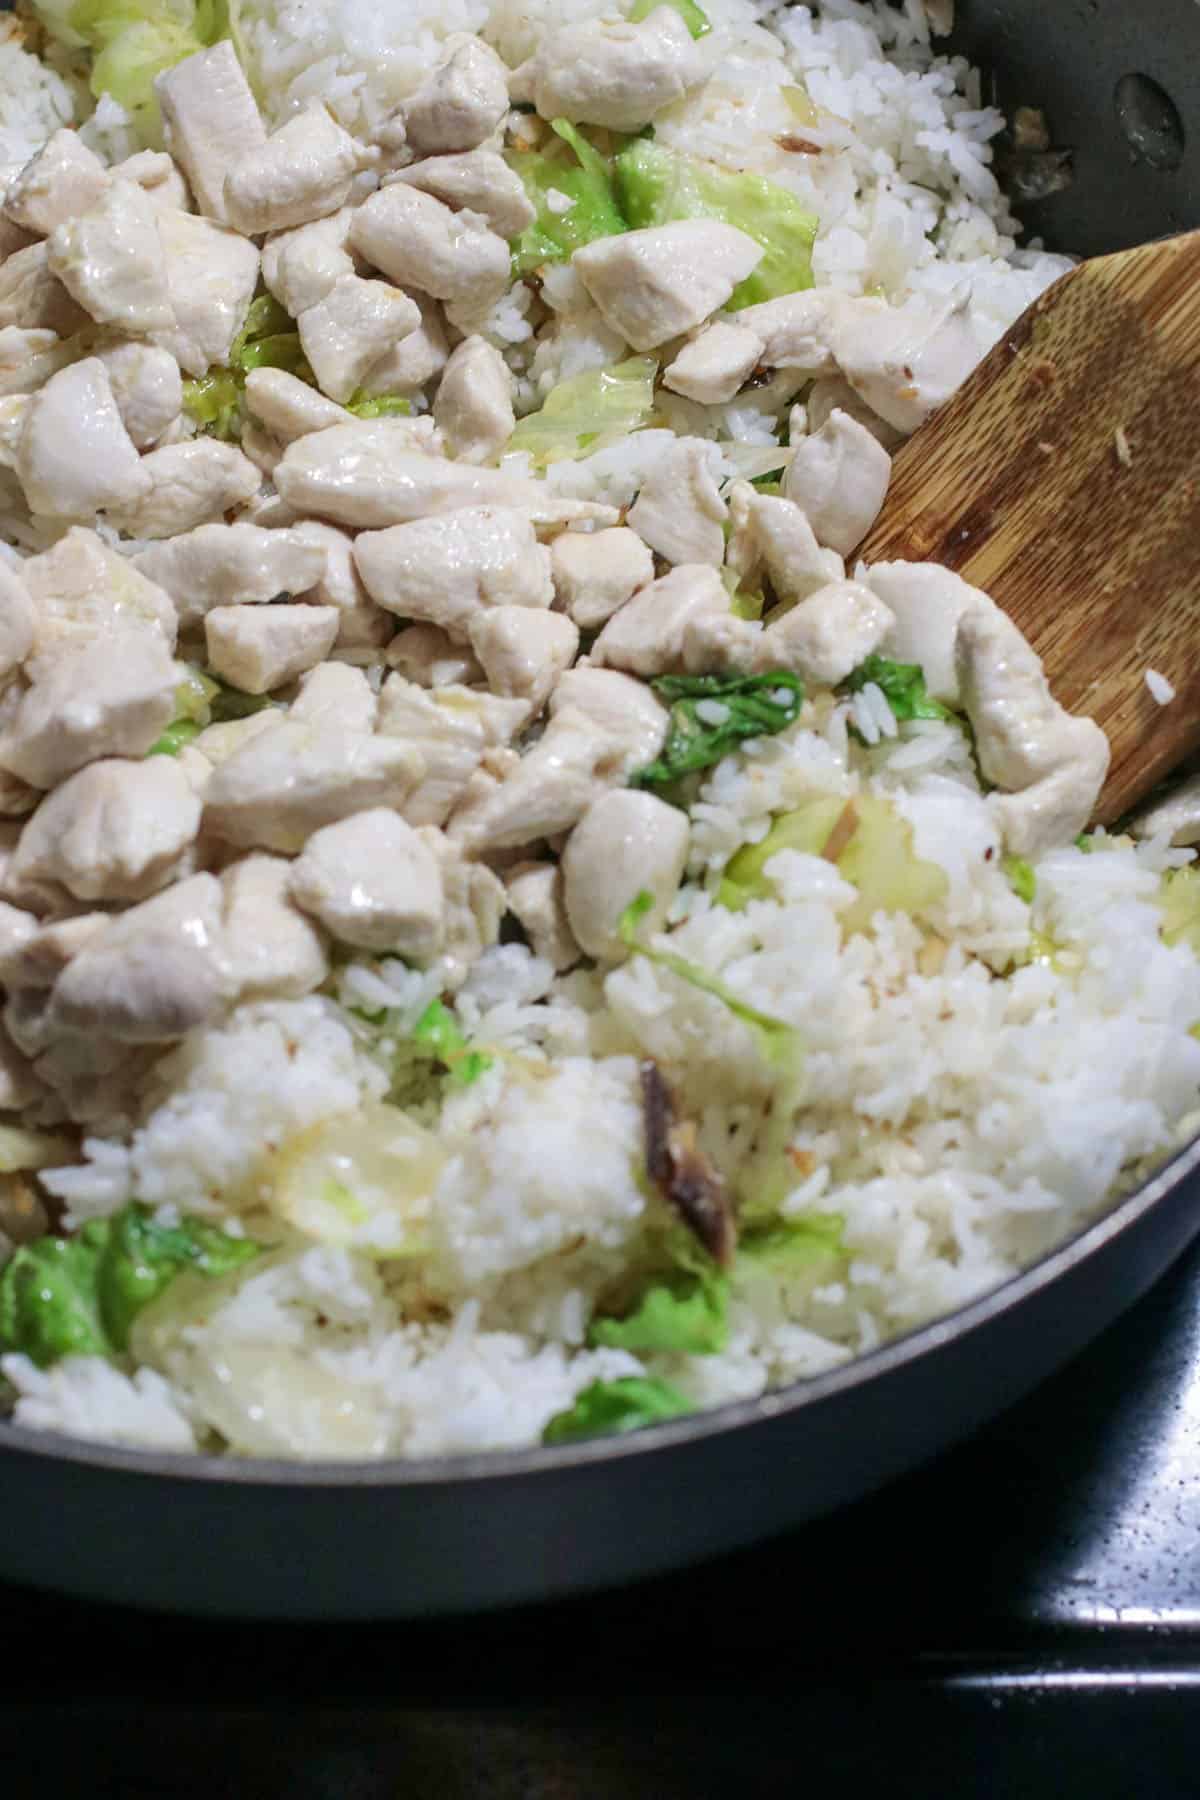 Mixing the chicken and lettuce to the rice in the pan.